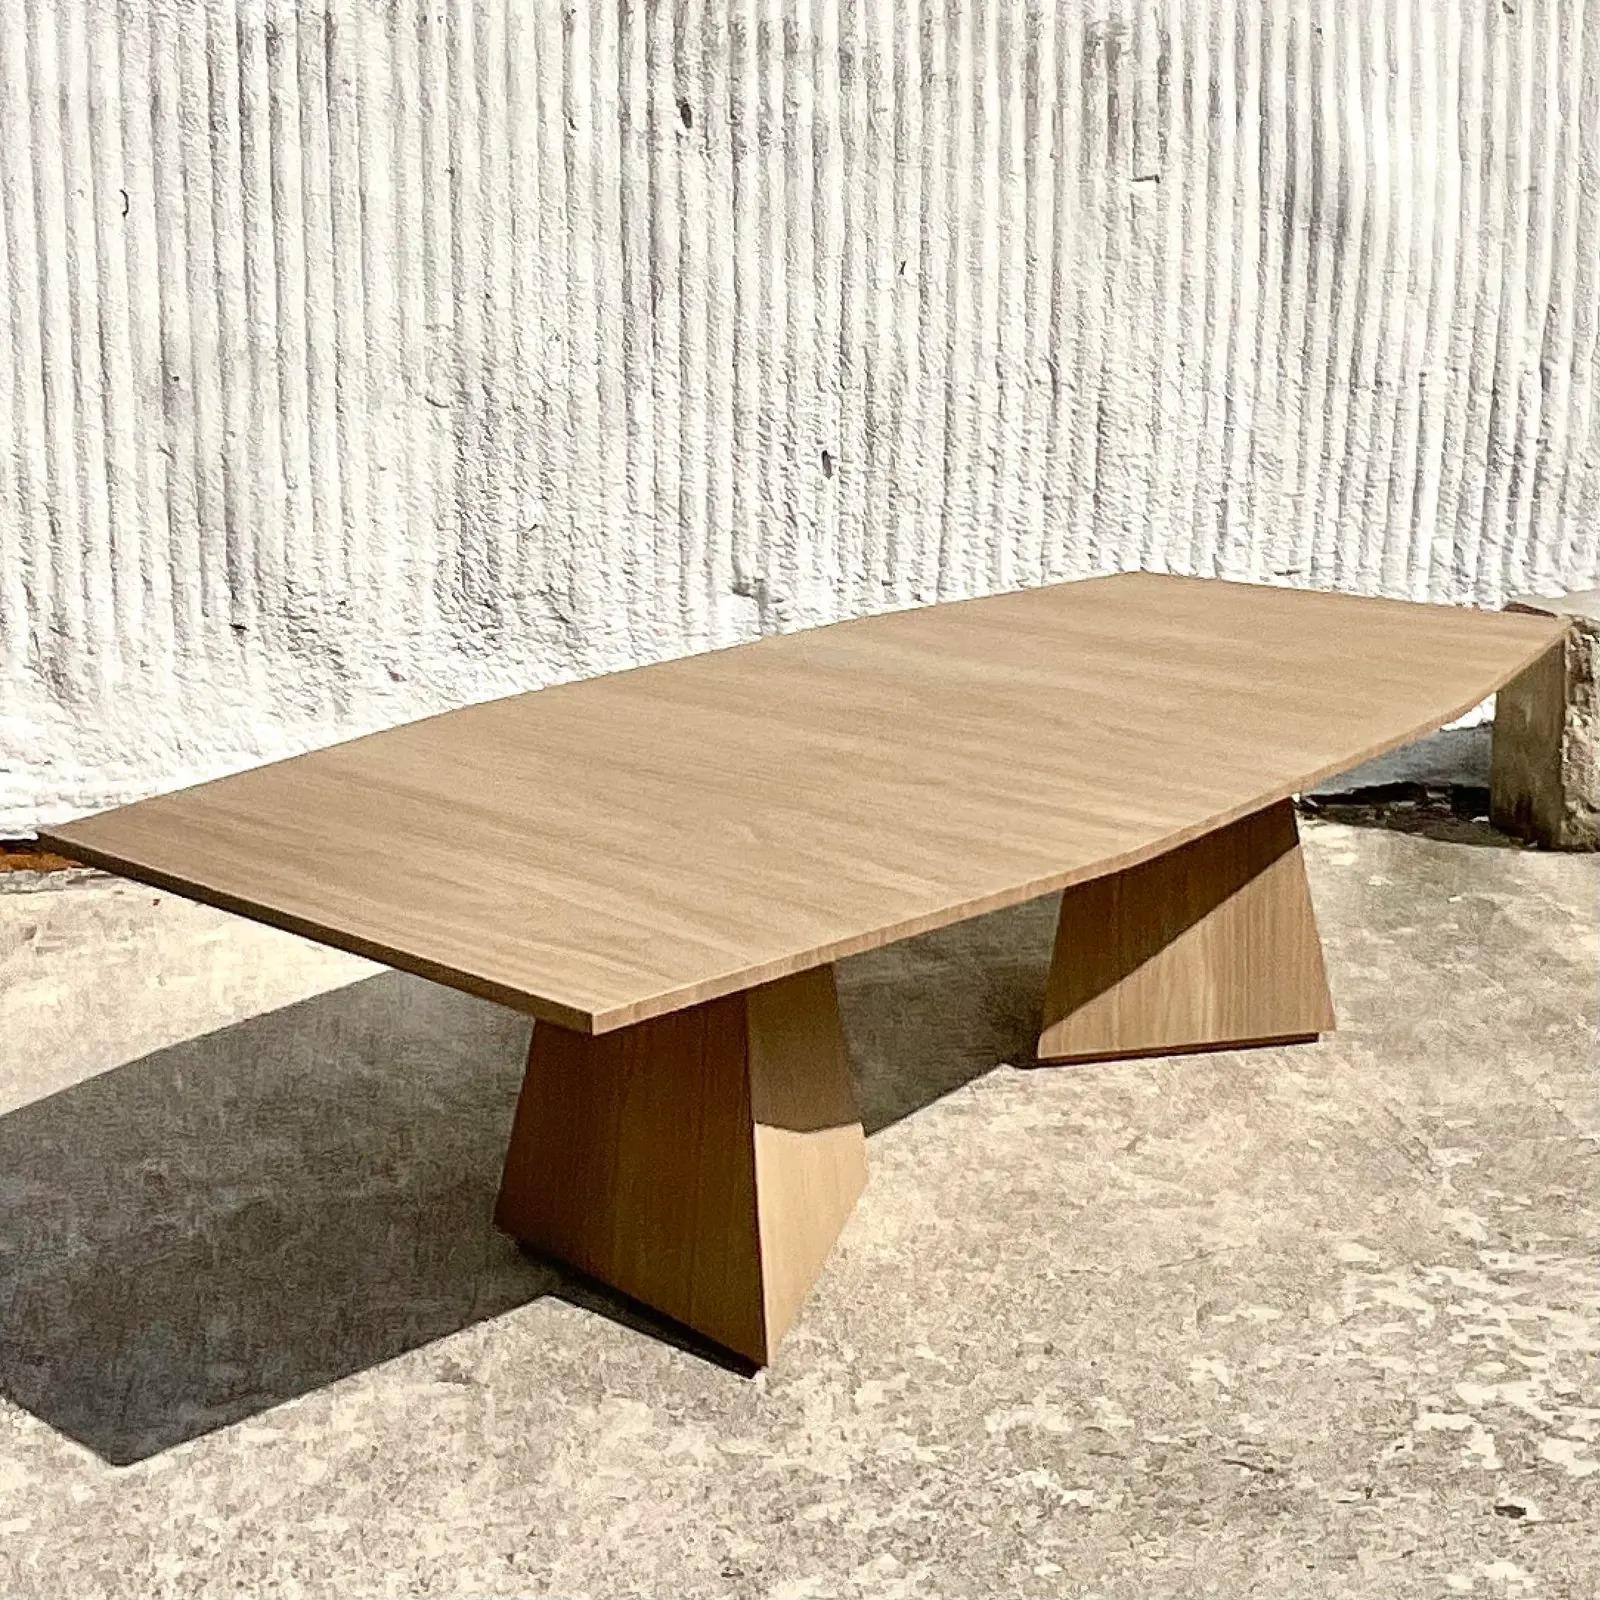 An extraordinary vintage Contemporary dining table. The “Divine” style by the Keith Fritz. A beautiful faceted design in a chic cerused finish. Acquired from a Palm Beach estate.